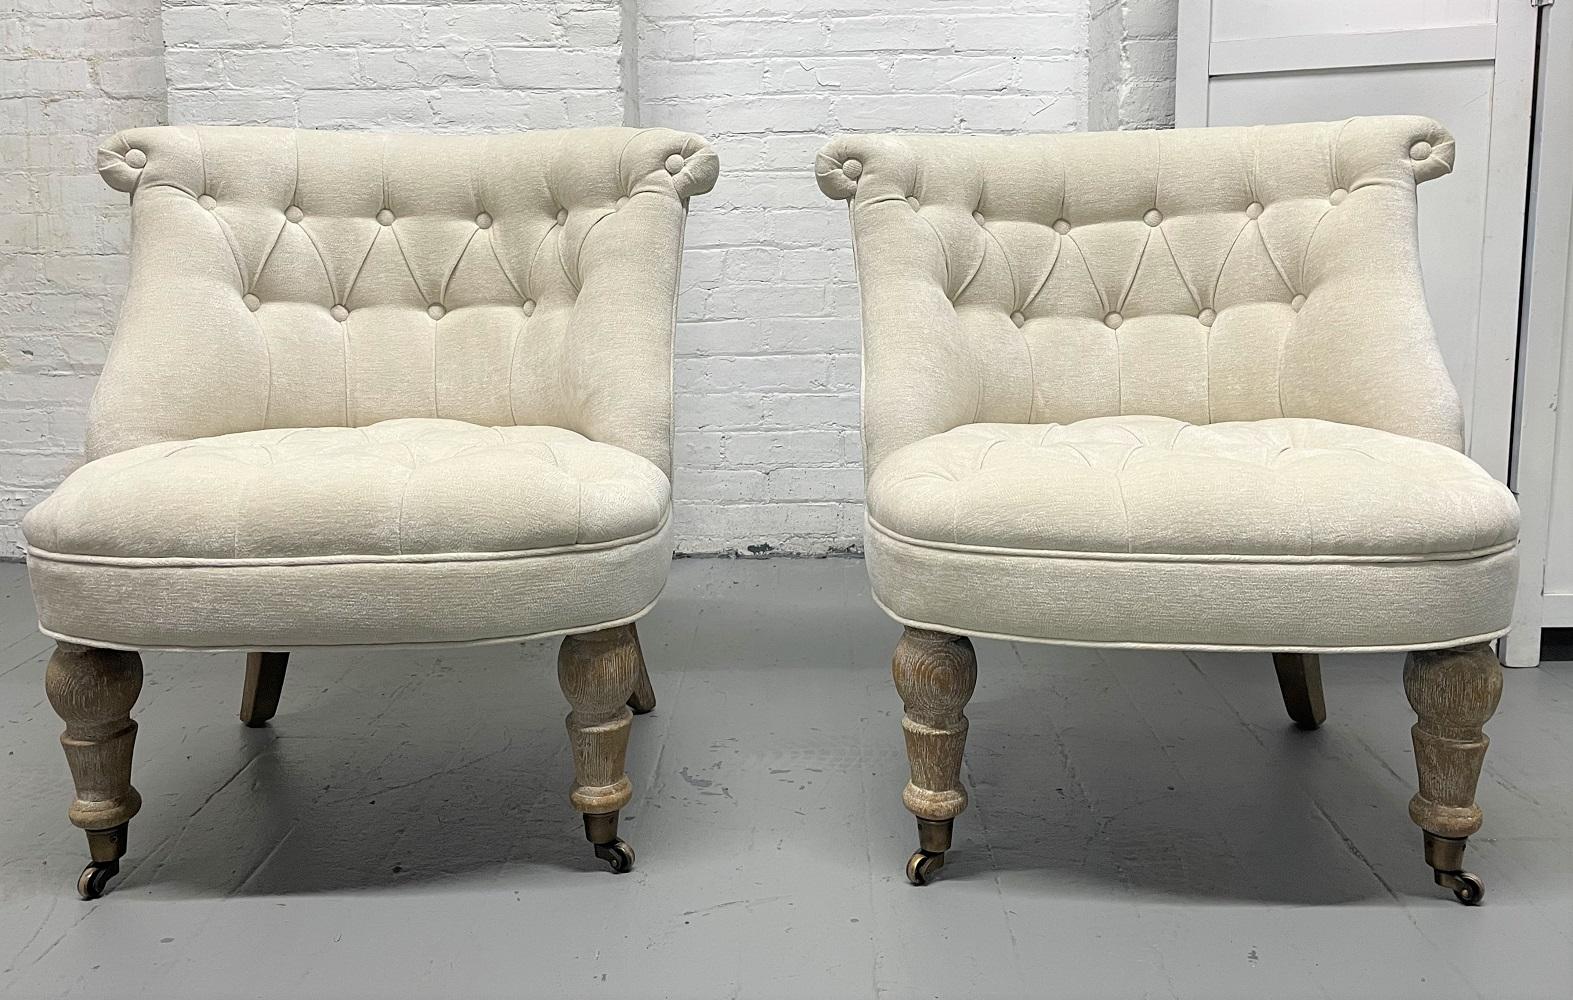 Pair of Tufted Cerused Lounge Slipper Chairs upholstered in a velvet fabric. The chairs have cerused oak legs with the front legs having casters.